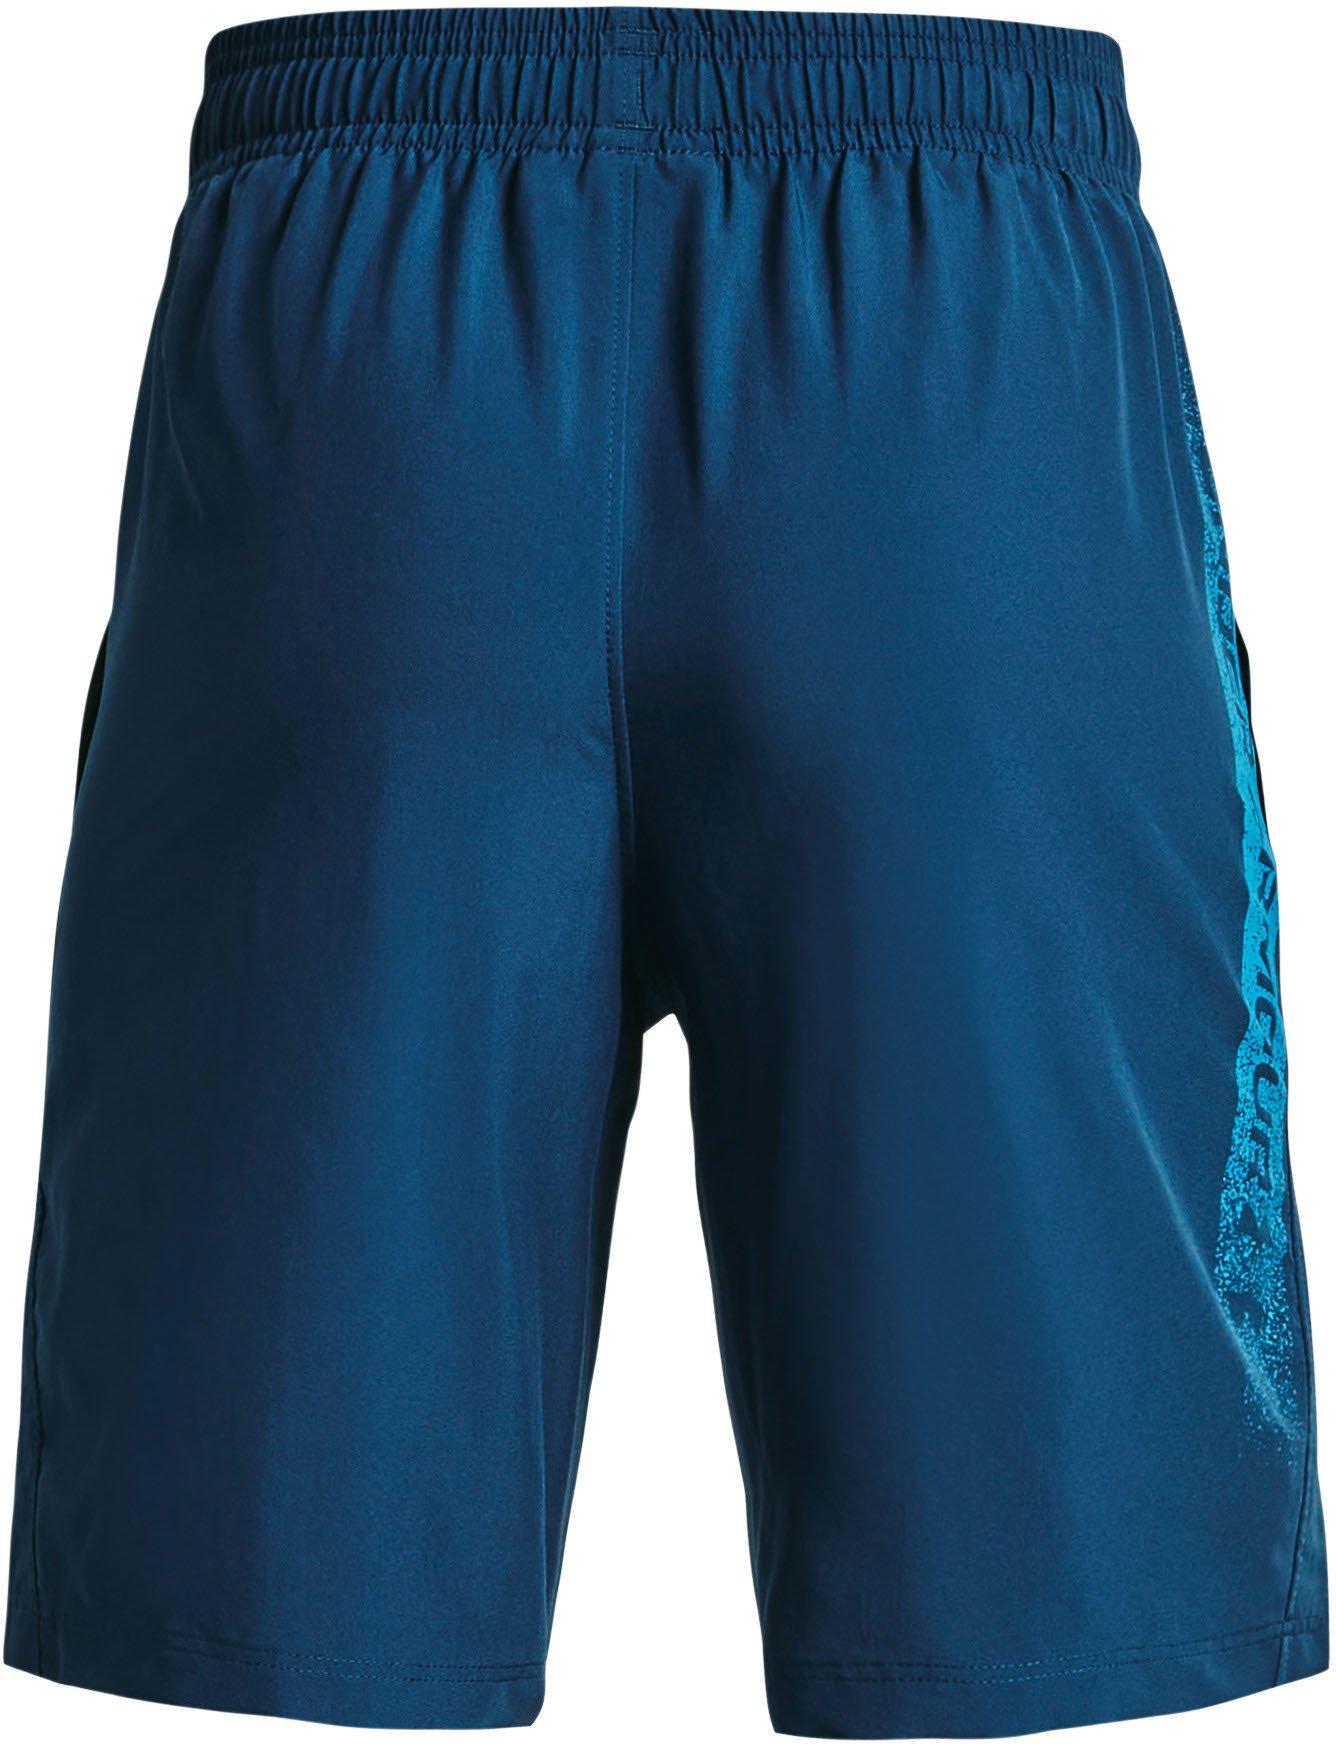 Under Armour Woven Graphic Shorts-BLU M